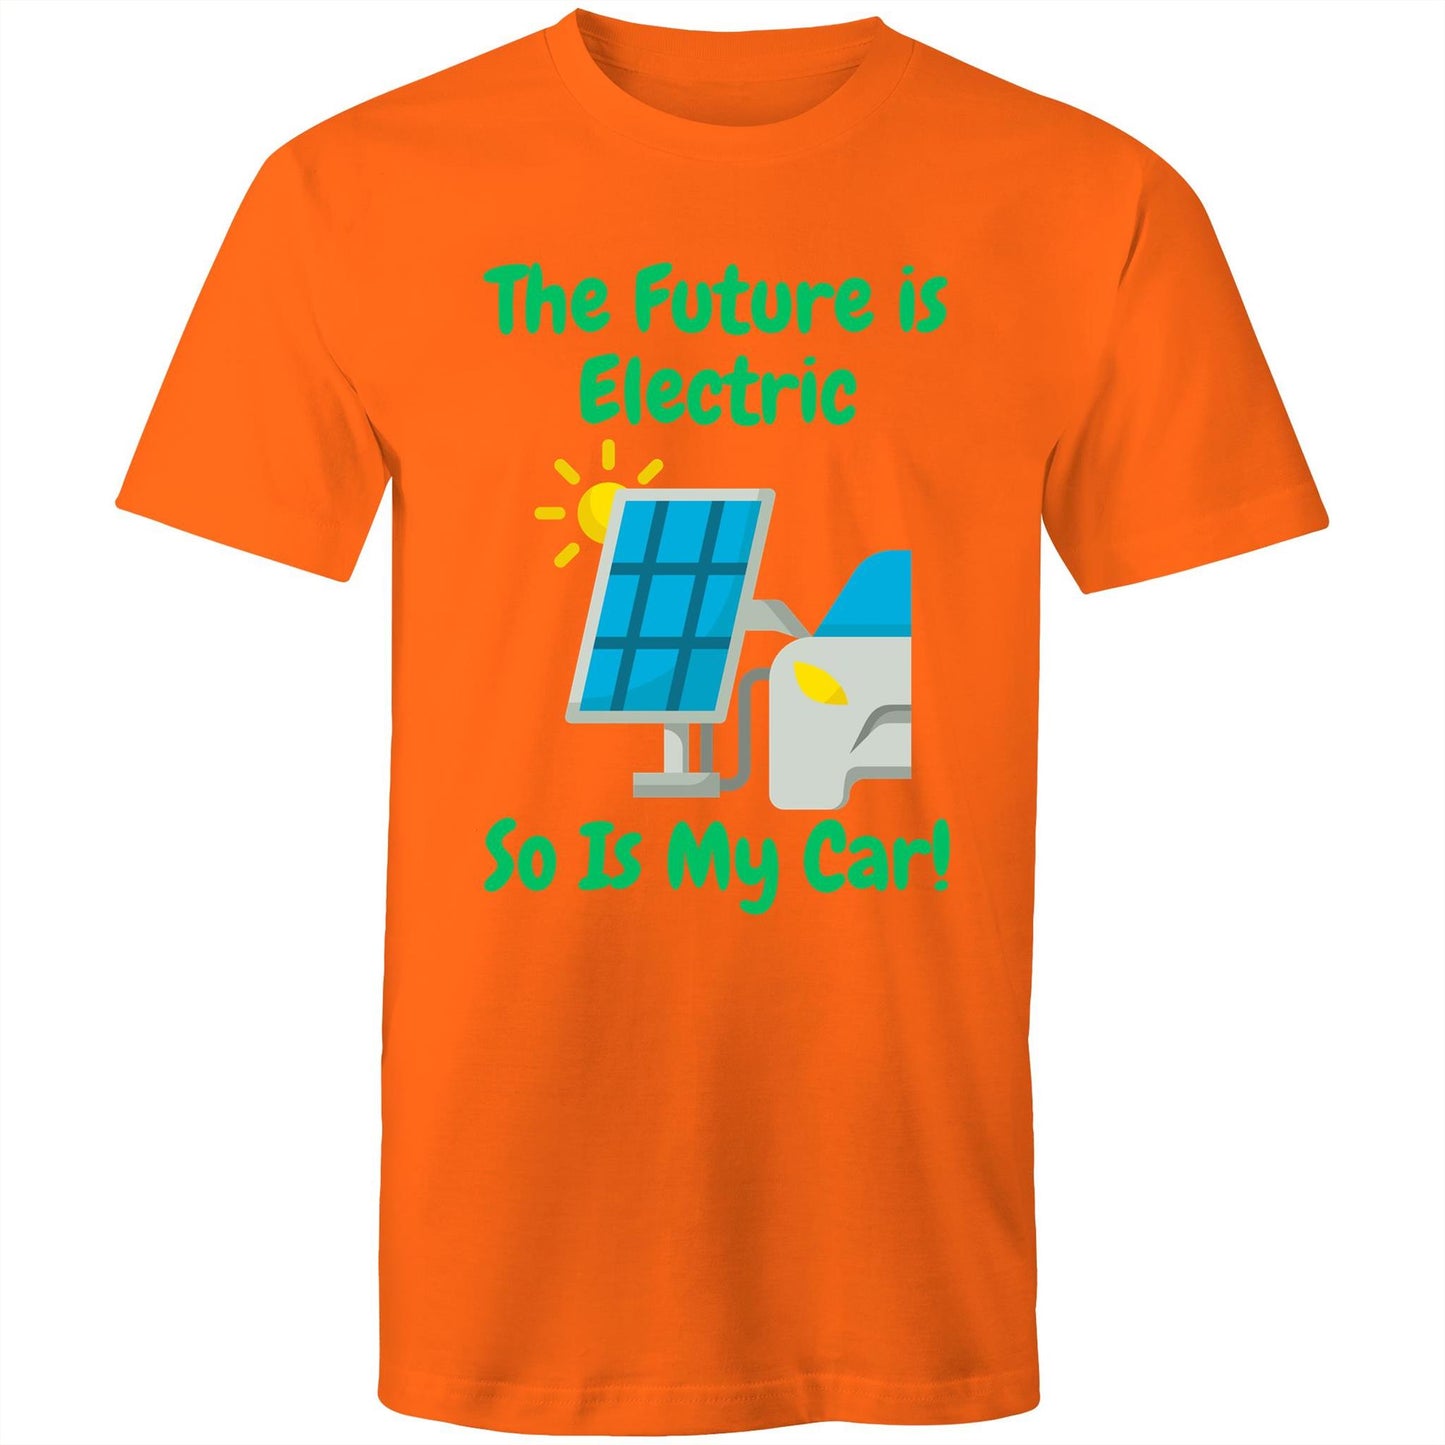 The Future is Electric - Mens T-Shirt